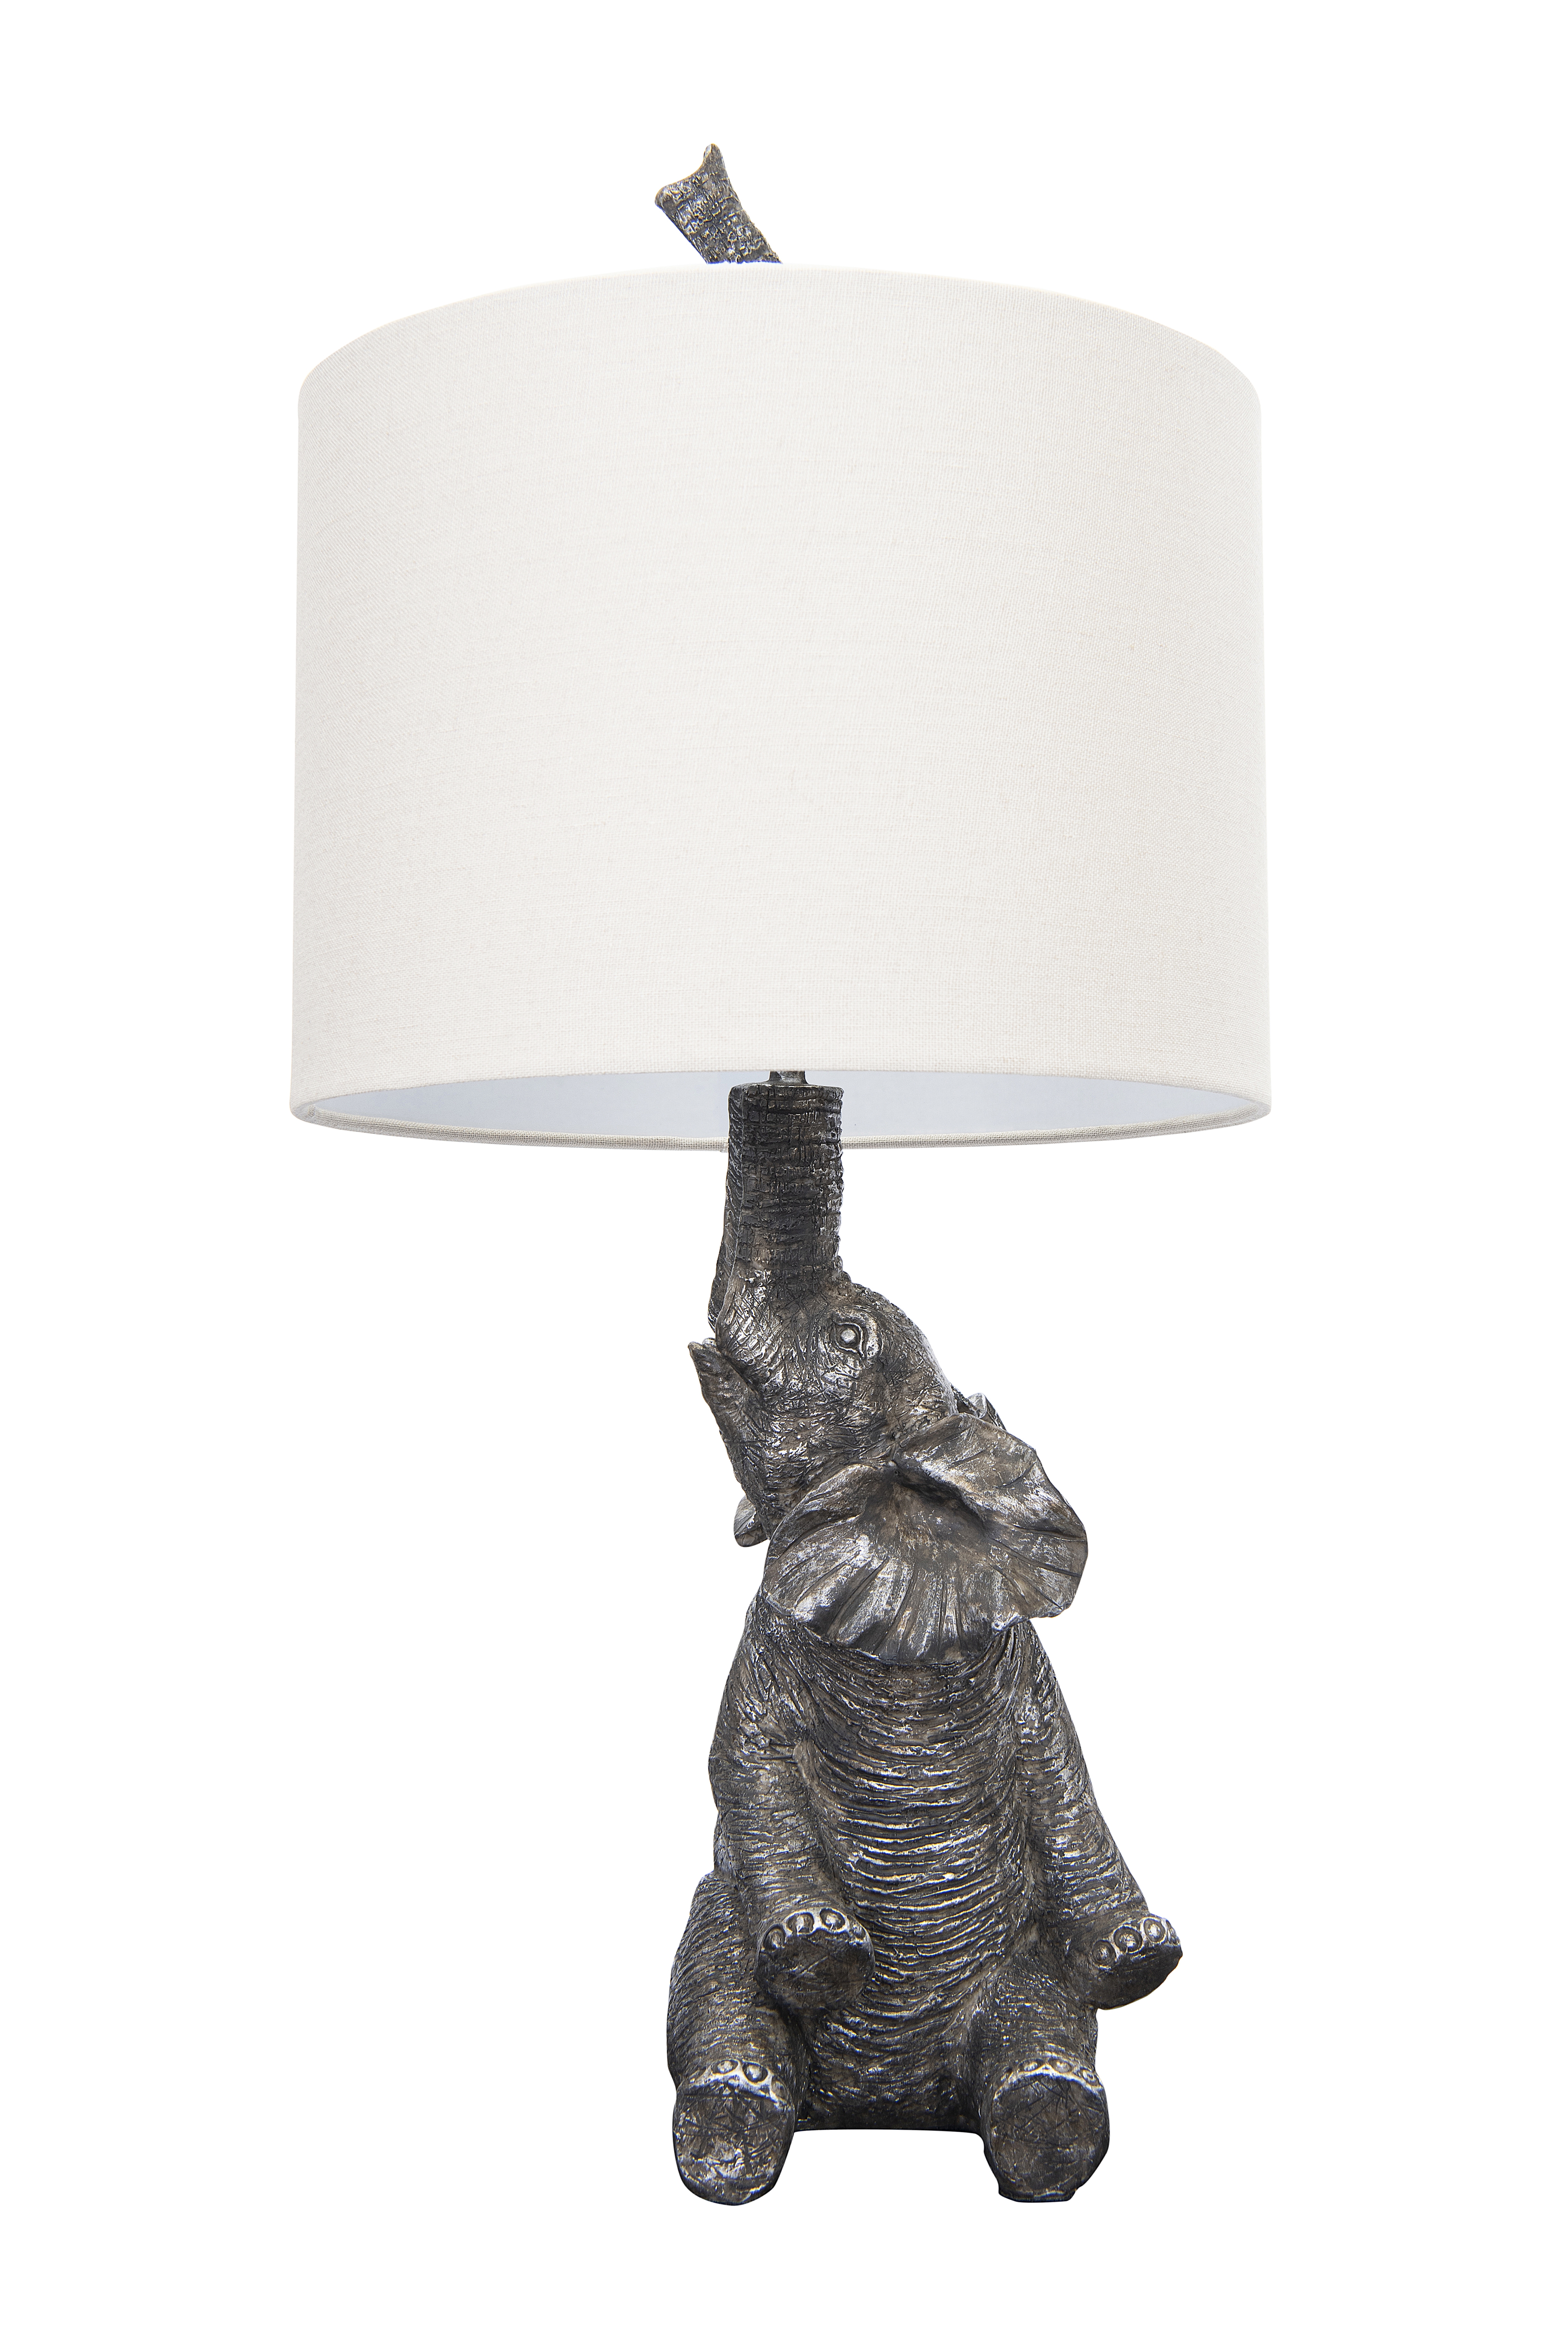 Resin Elephant Shaped Table Lamp with Linen Shade - Image 0